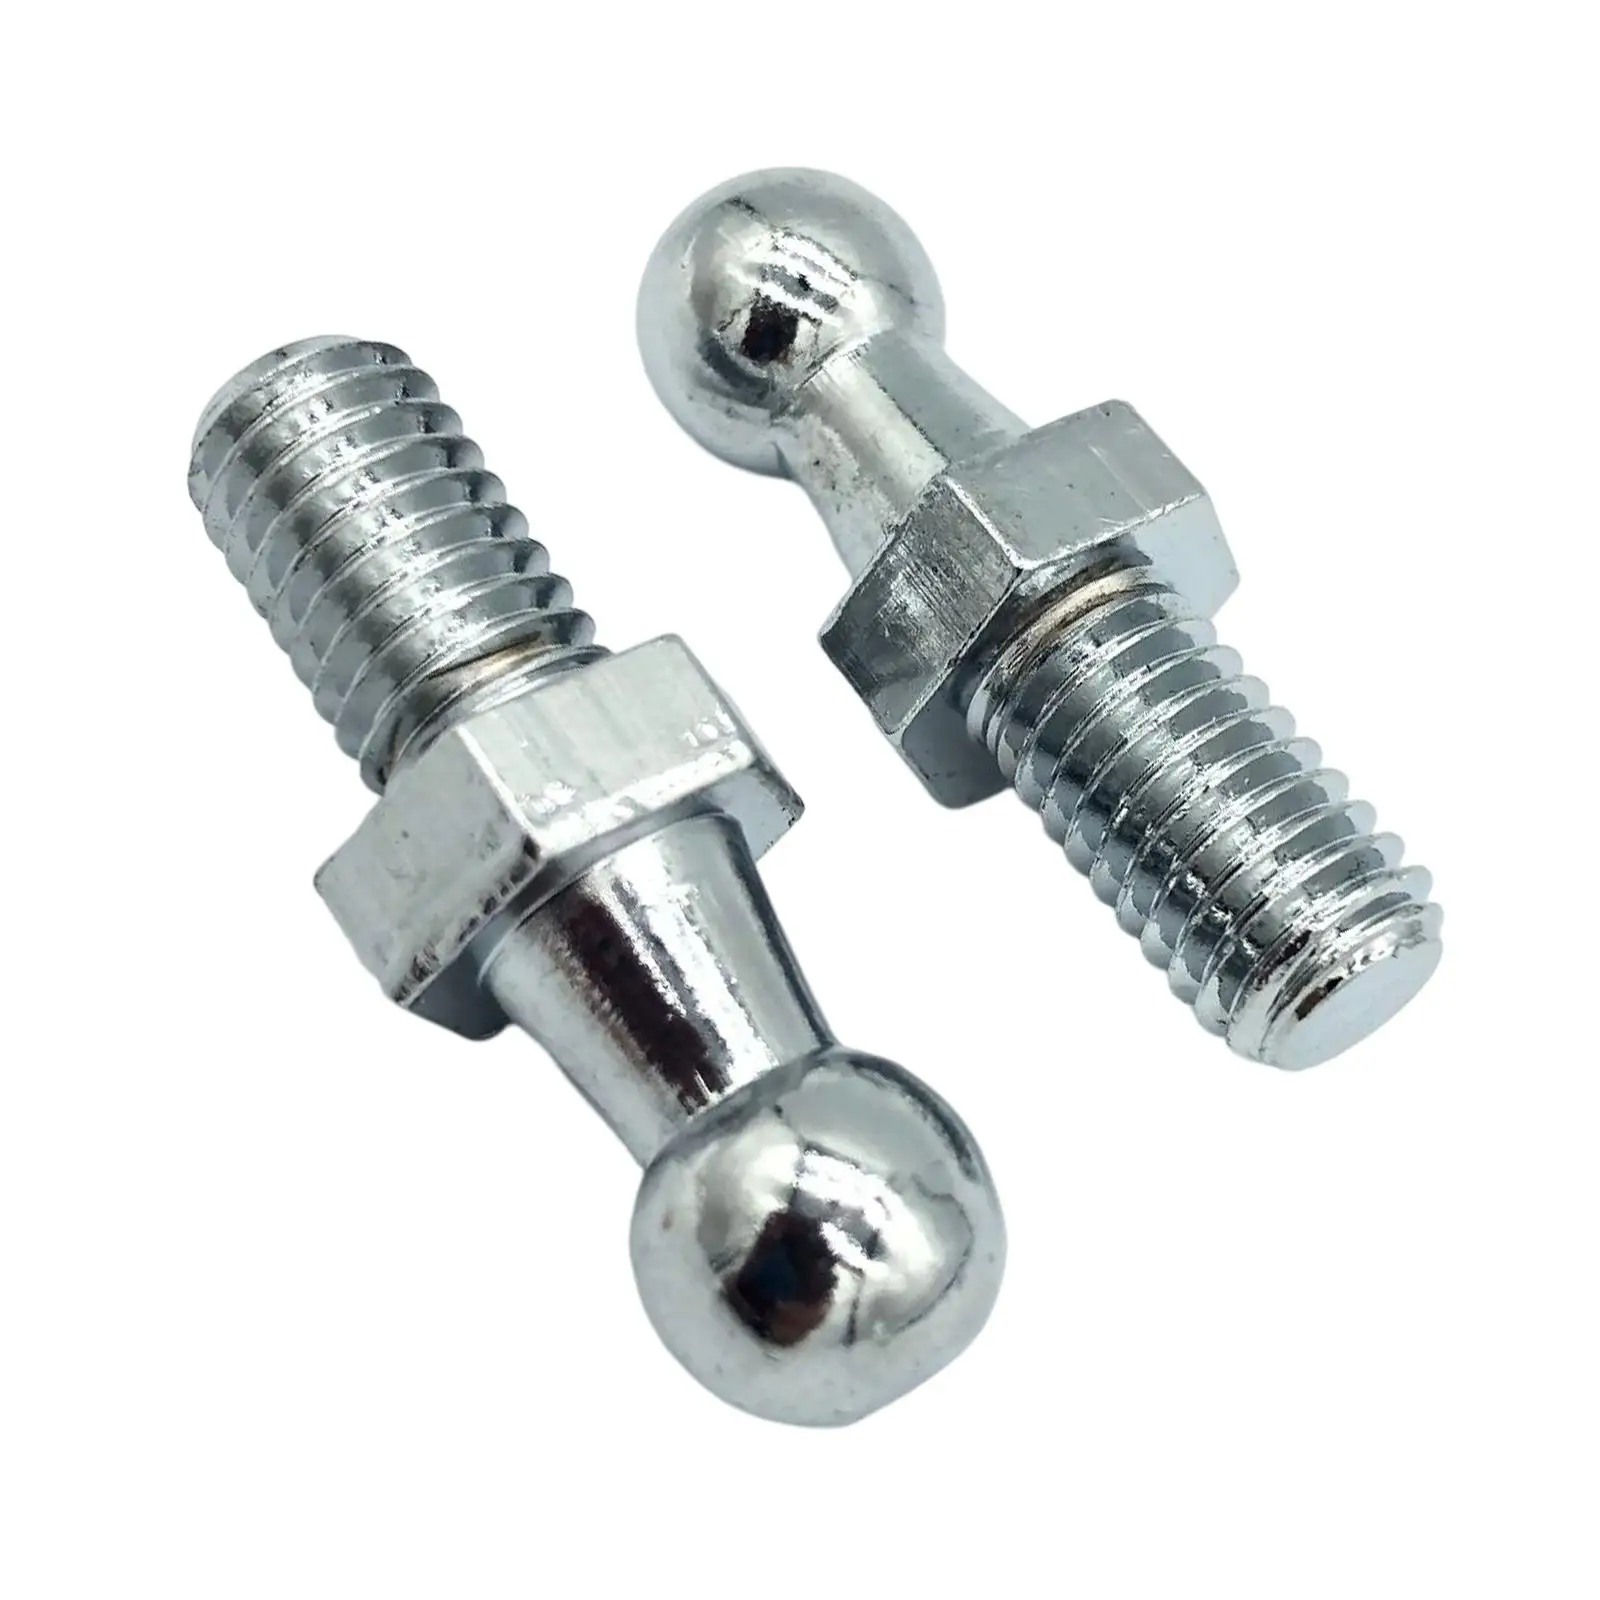 2x Ball Stud Bolt Durable Direct Replaces Easy Installation Accessory M8 M6 10mm